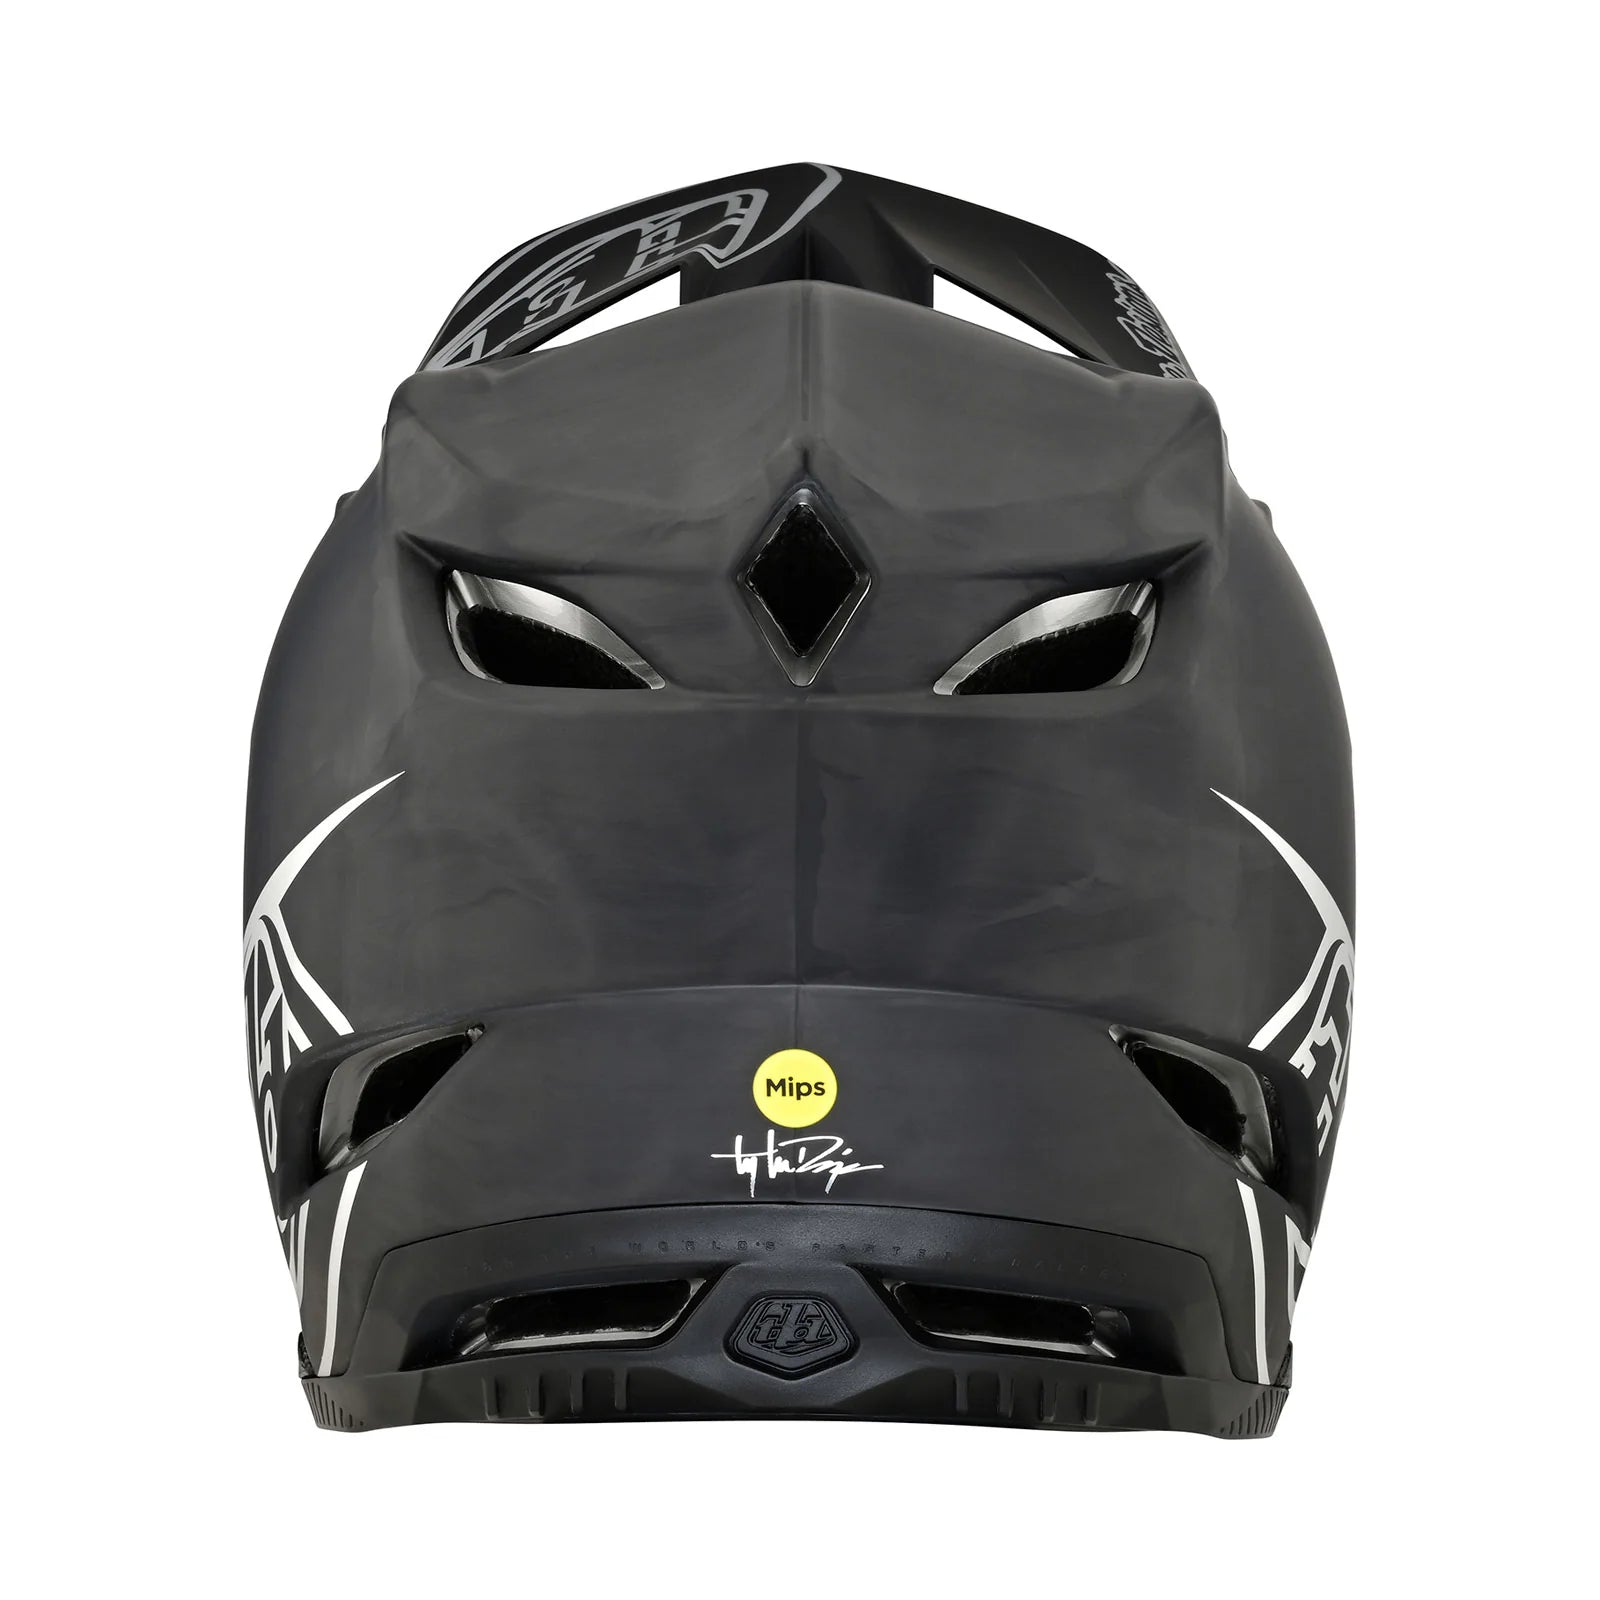 A black TLD D4 AS Carbon W/MIPS Helmet with white text.